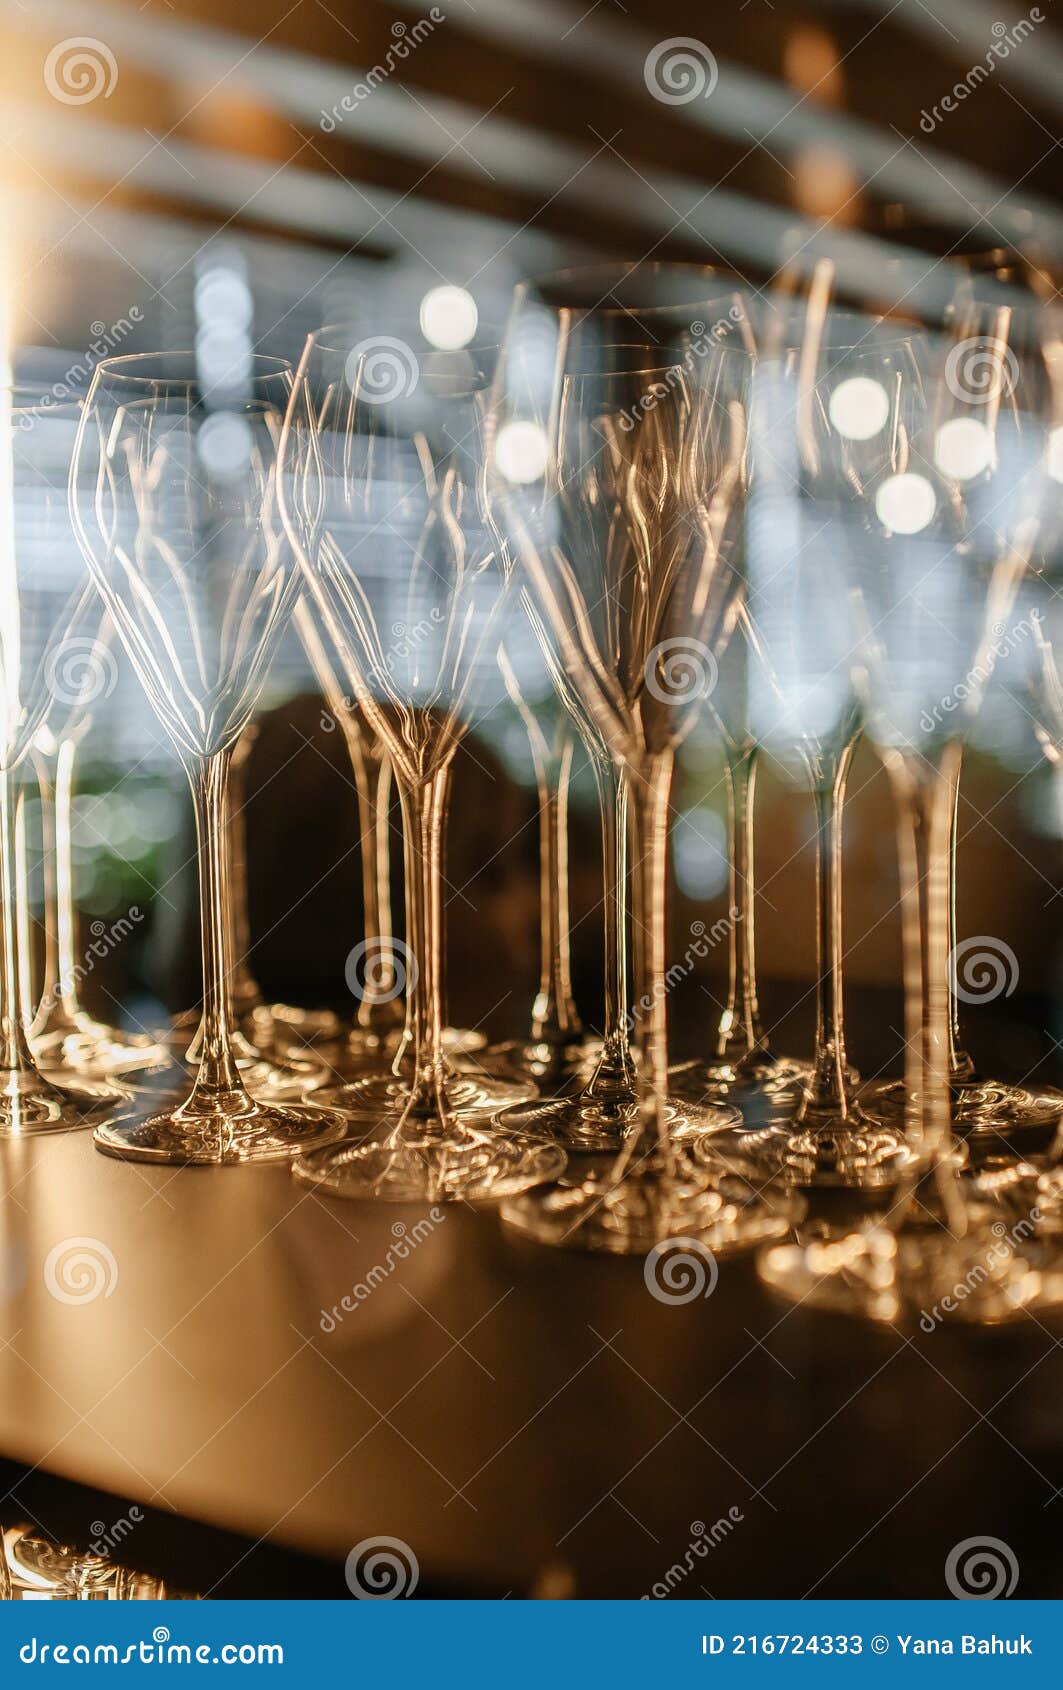 closeup of colorful wine glasses.wine glasses on a glass shelf with lighting. empty crystal glasses close-up